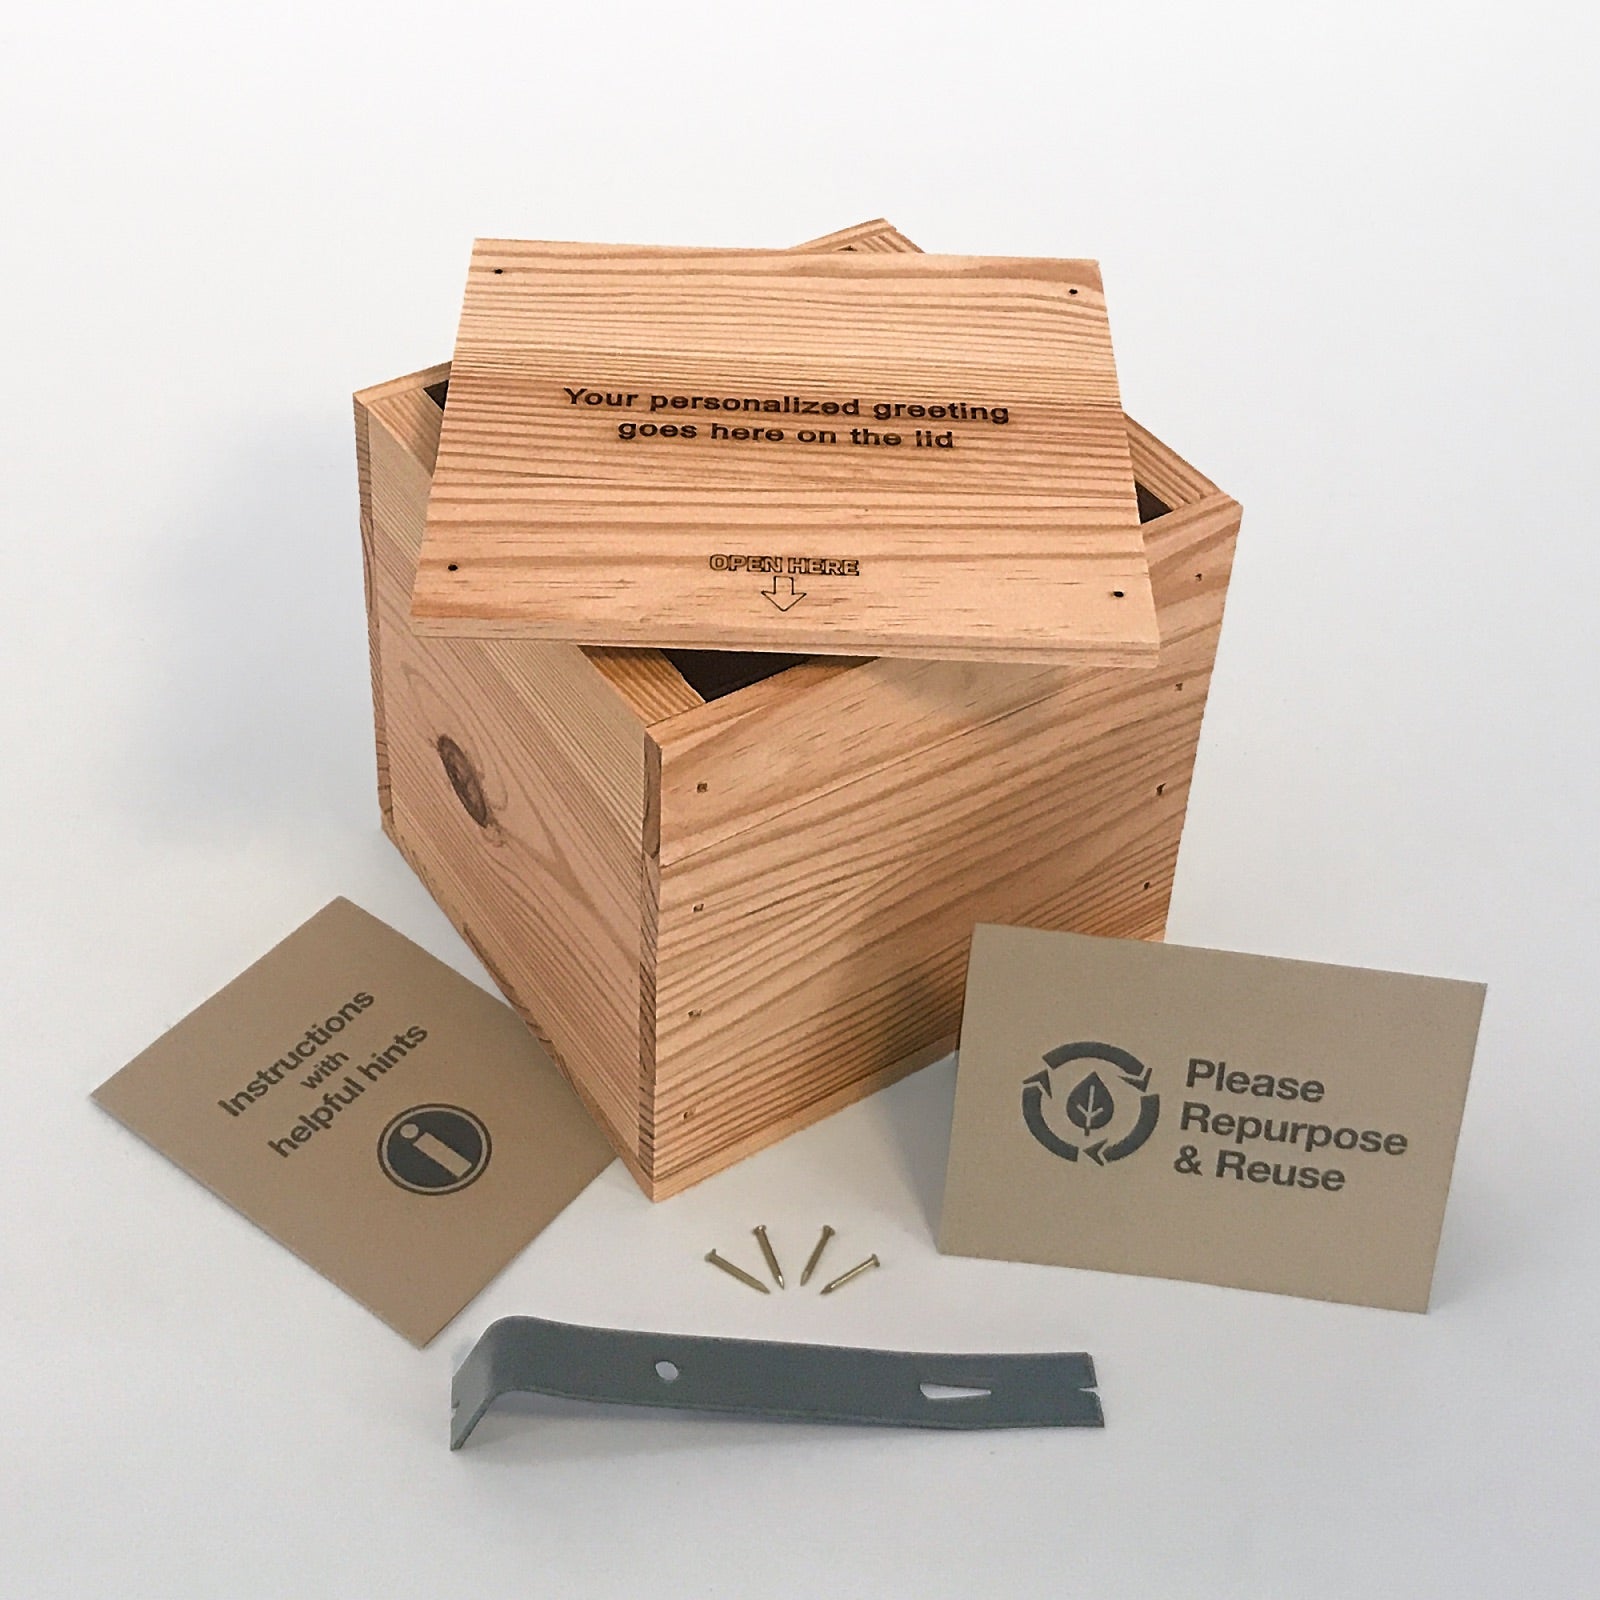 Small-sized DIY gift crate kit with greeting by Carpenter Core, 6-GK-6.25-6.375-7-GT-NW-LL, 12-GK-6.25-6.375-7-GT-NW-LL, 24-GK-6.25-6.375-7-GT-NW-LL, 48-GK-6.25-6.375-7-GT-NW-LL, 96-GK-6.25-6.375-7-GT-NW-LL